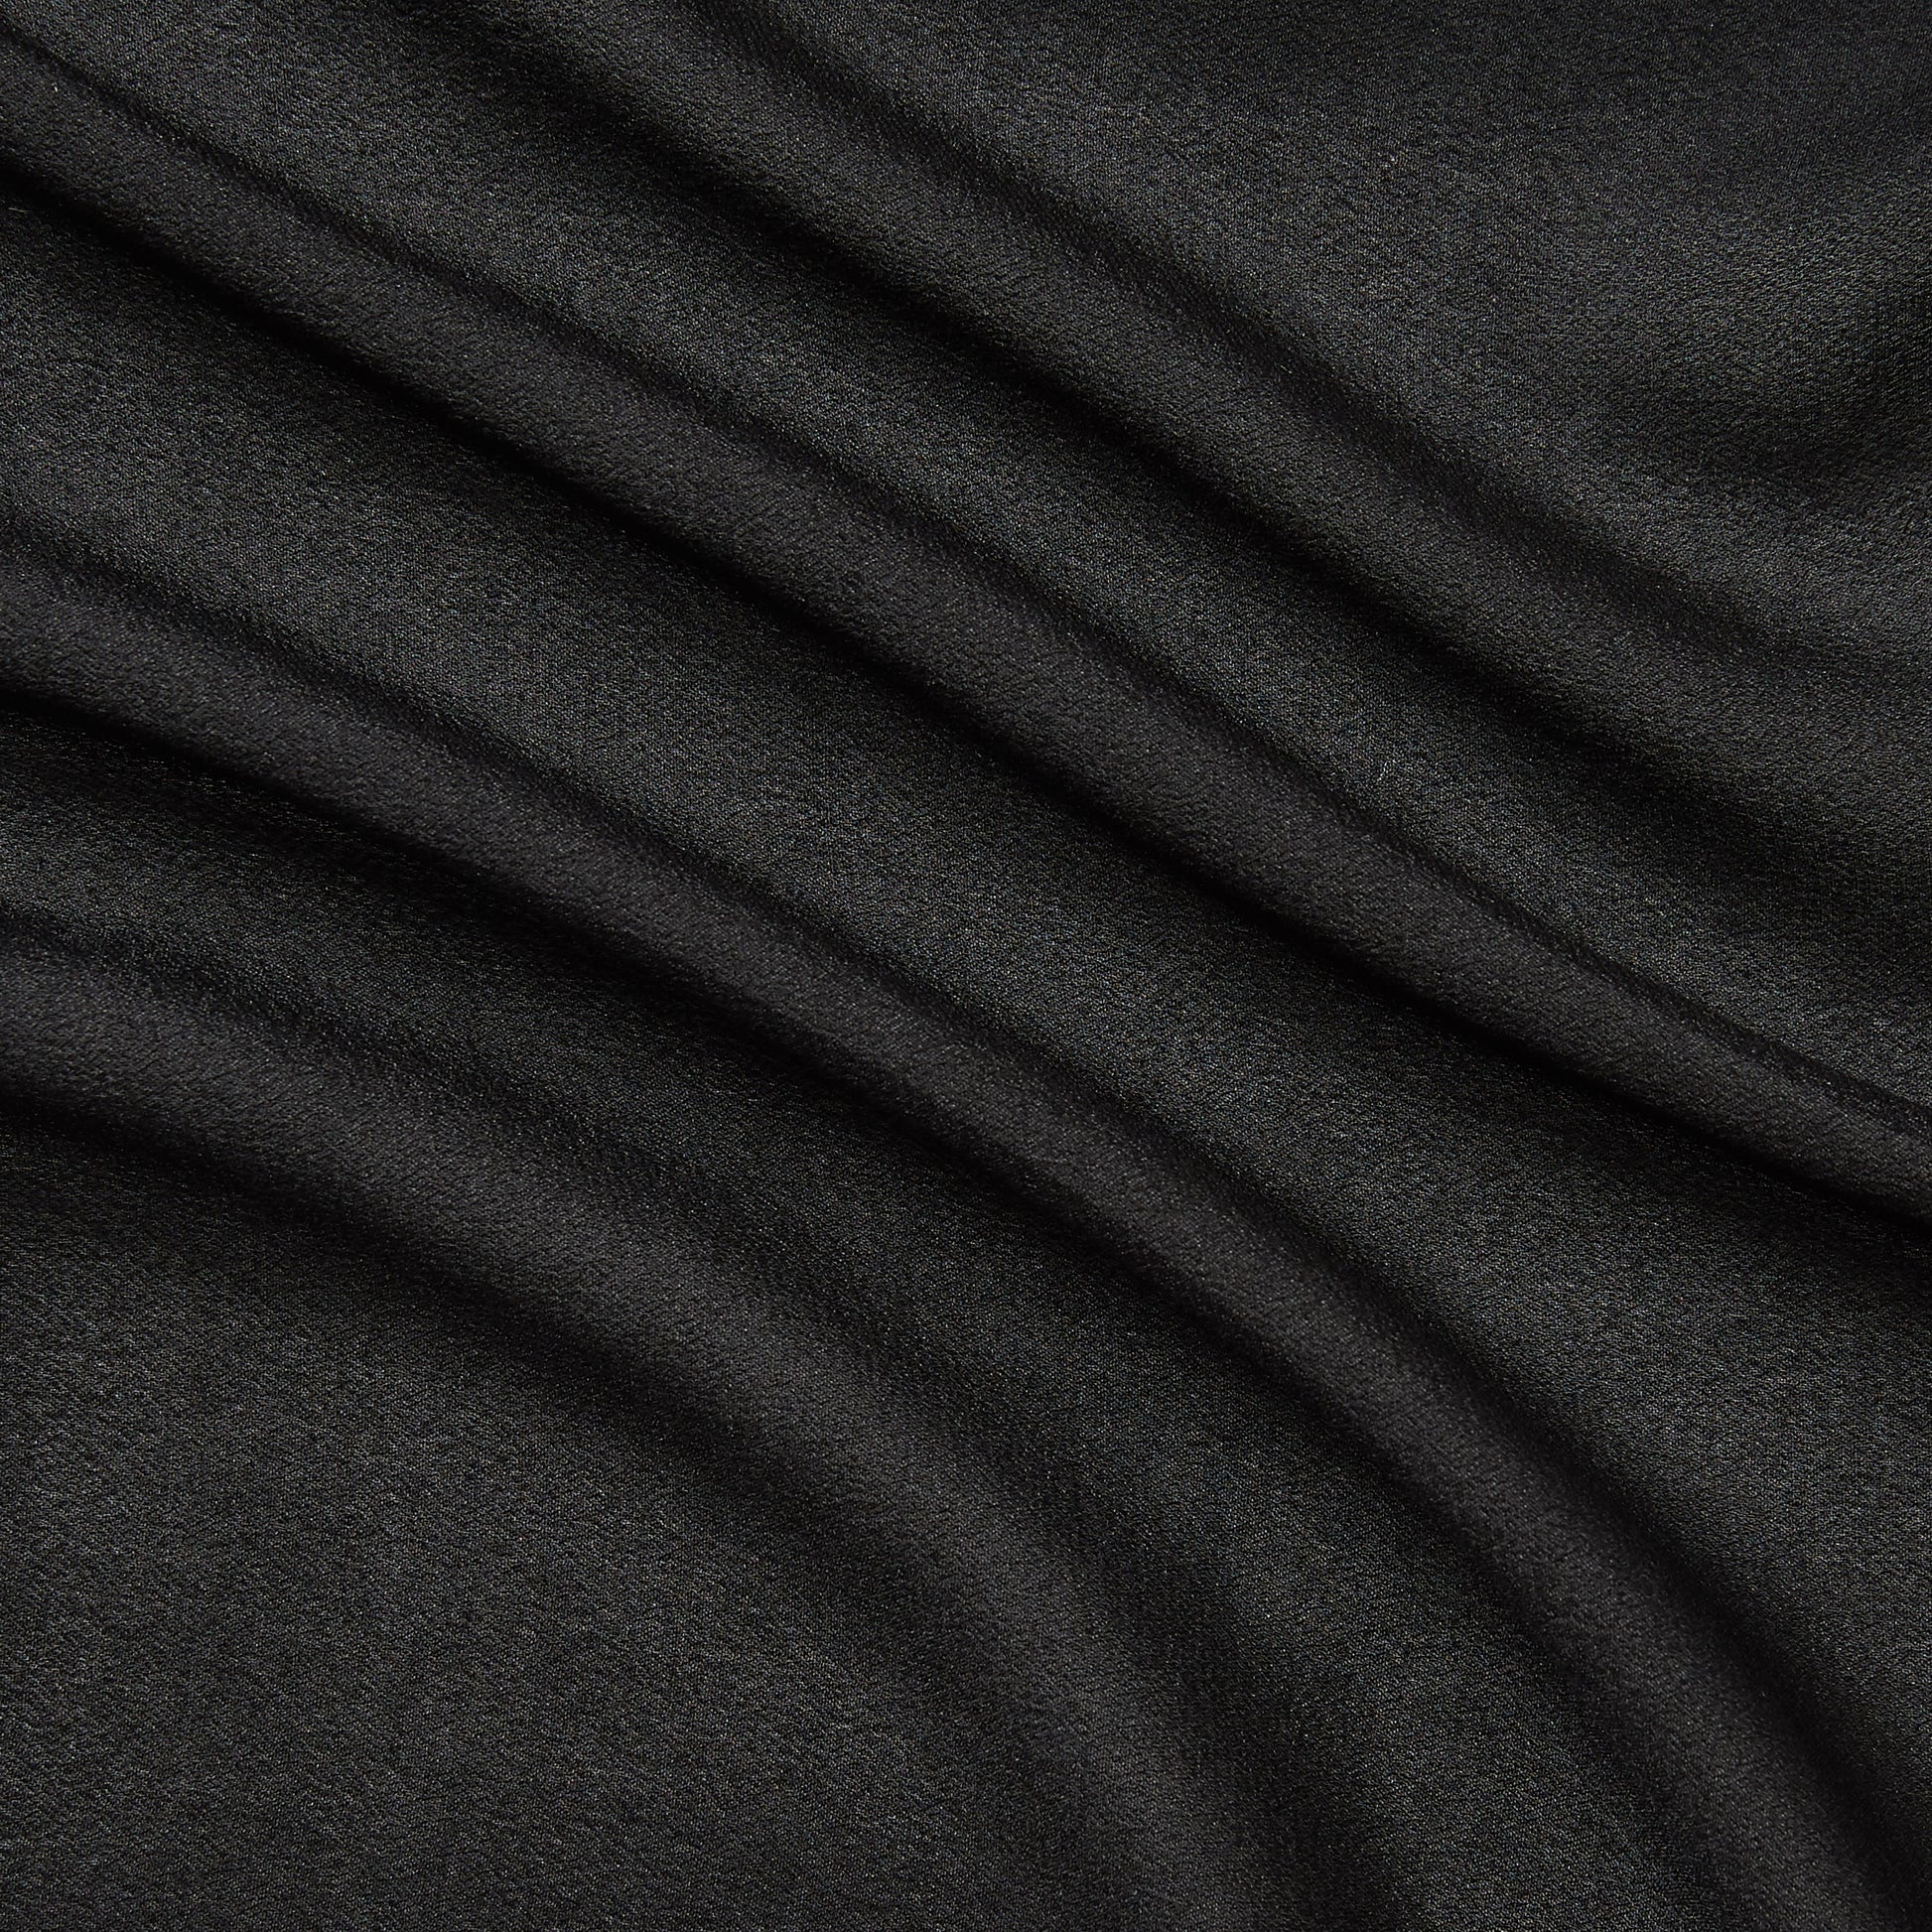 Featuring shimmer a black colored fabric with metallic glitter print on Semi-sheer, soft pure silk georgette featuring good drape